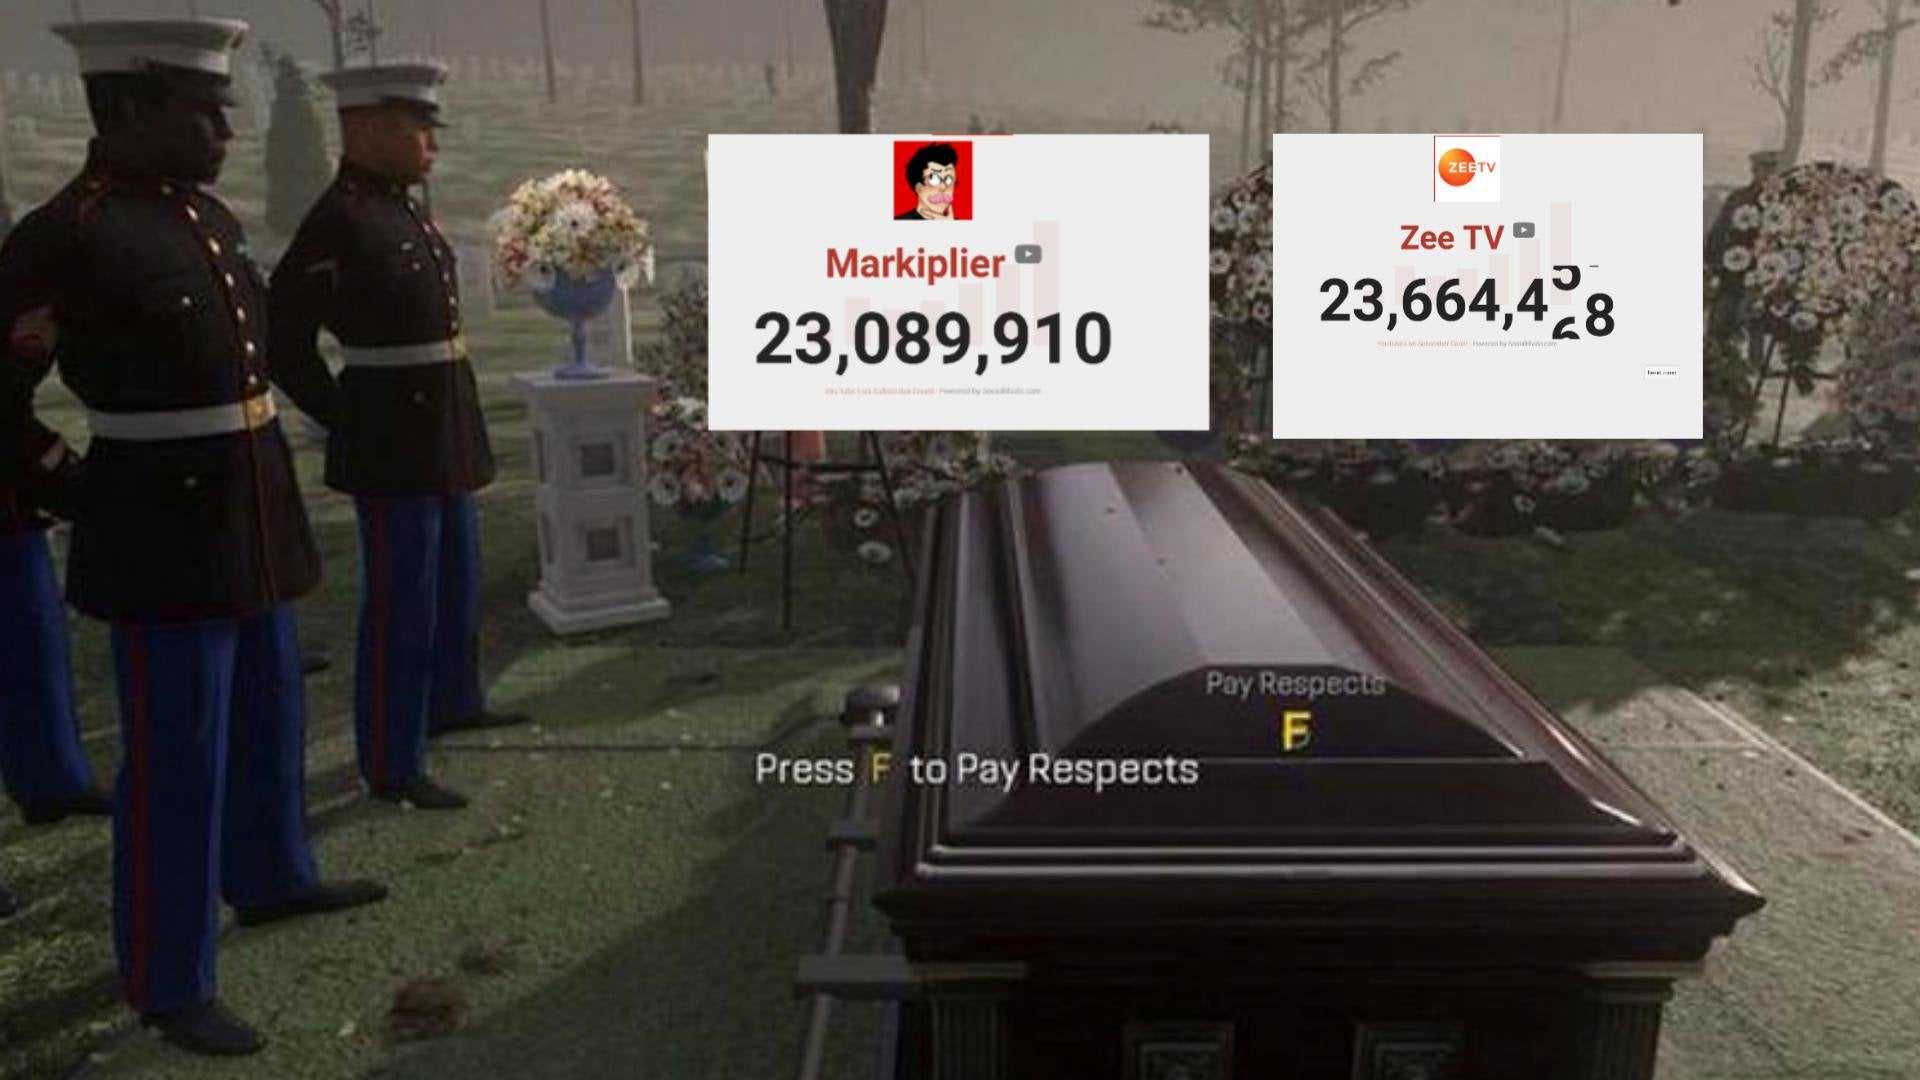 Where does ‘press f to pay respects’ come from?